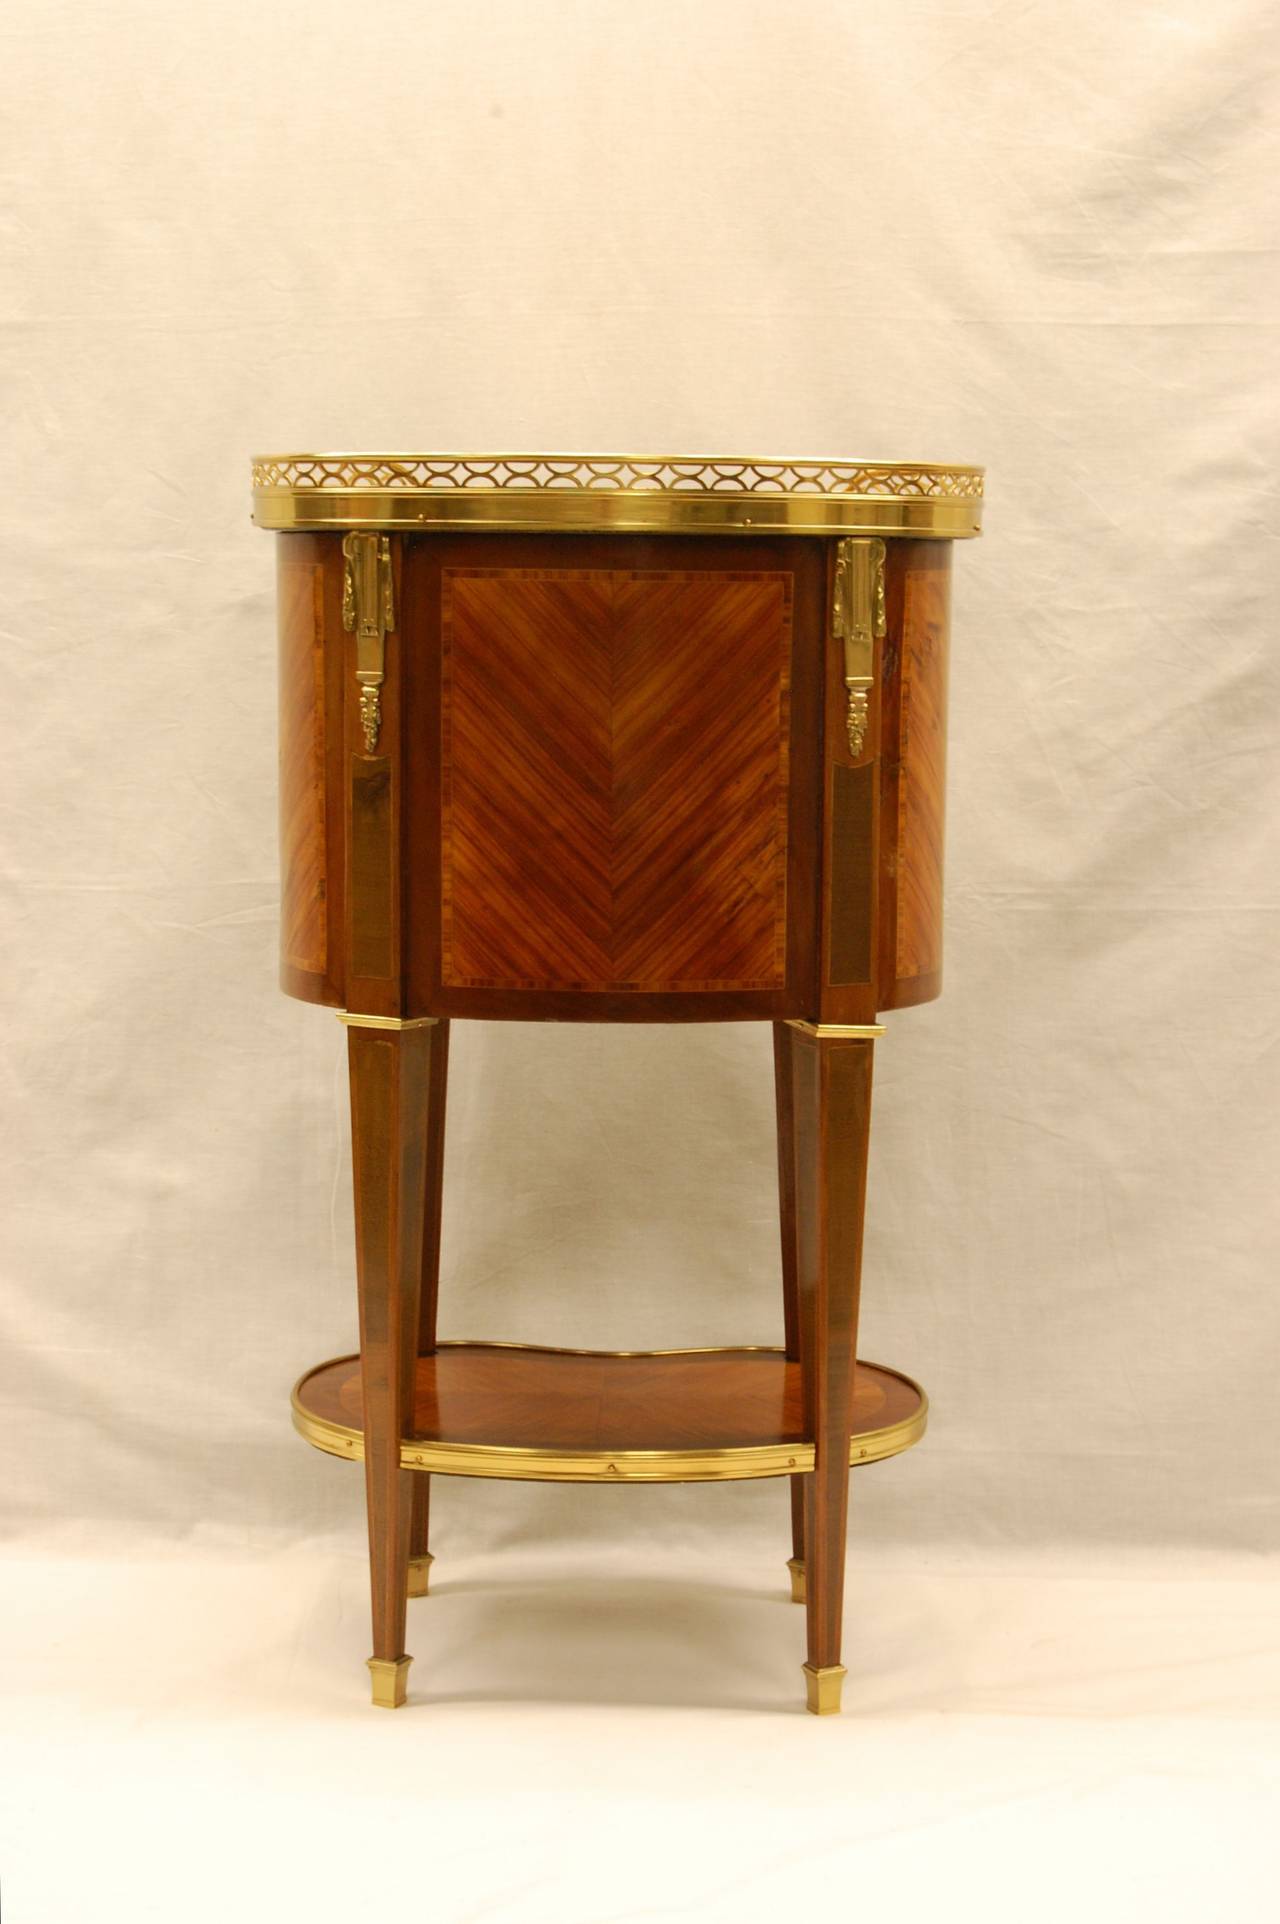 Louis XVI Oval Shaped Sienna Marble-Top French Side Table with Brass Gallery and Ormolu